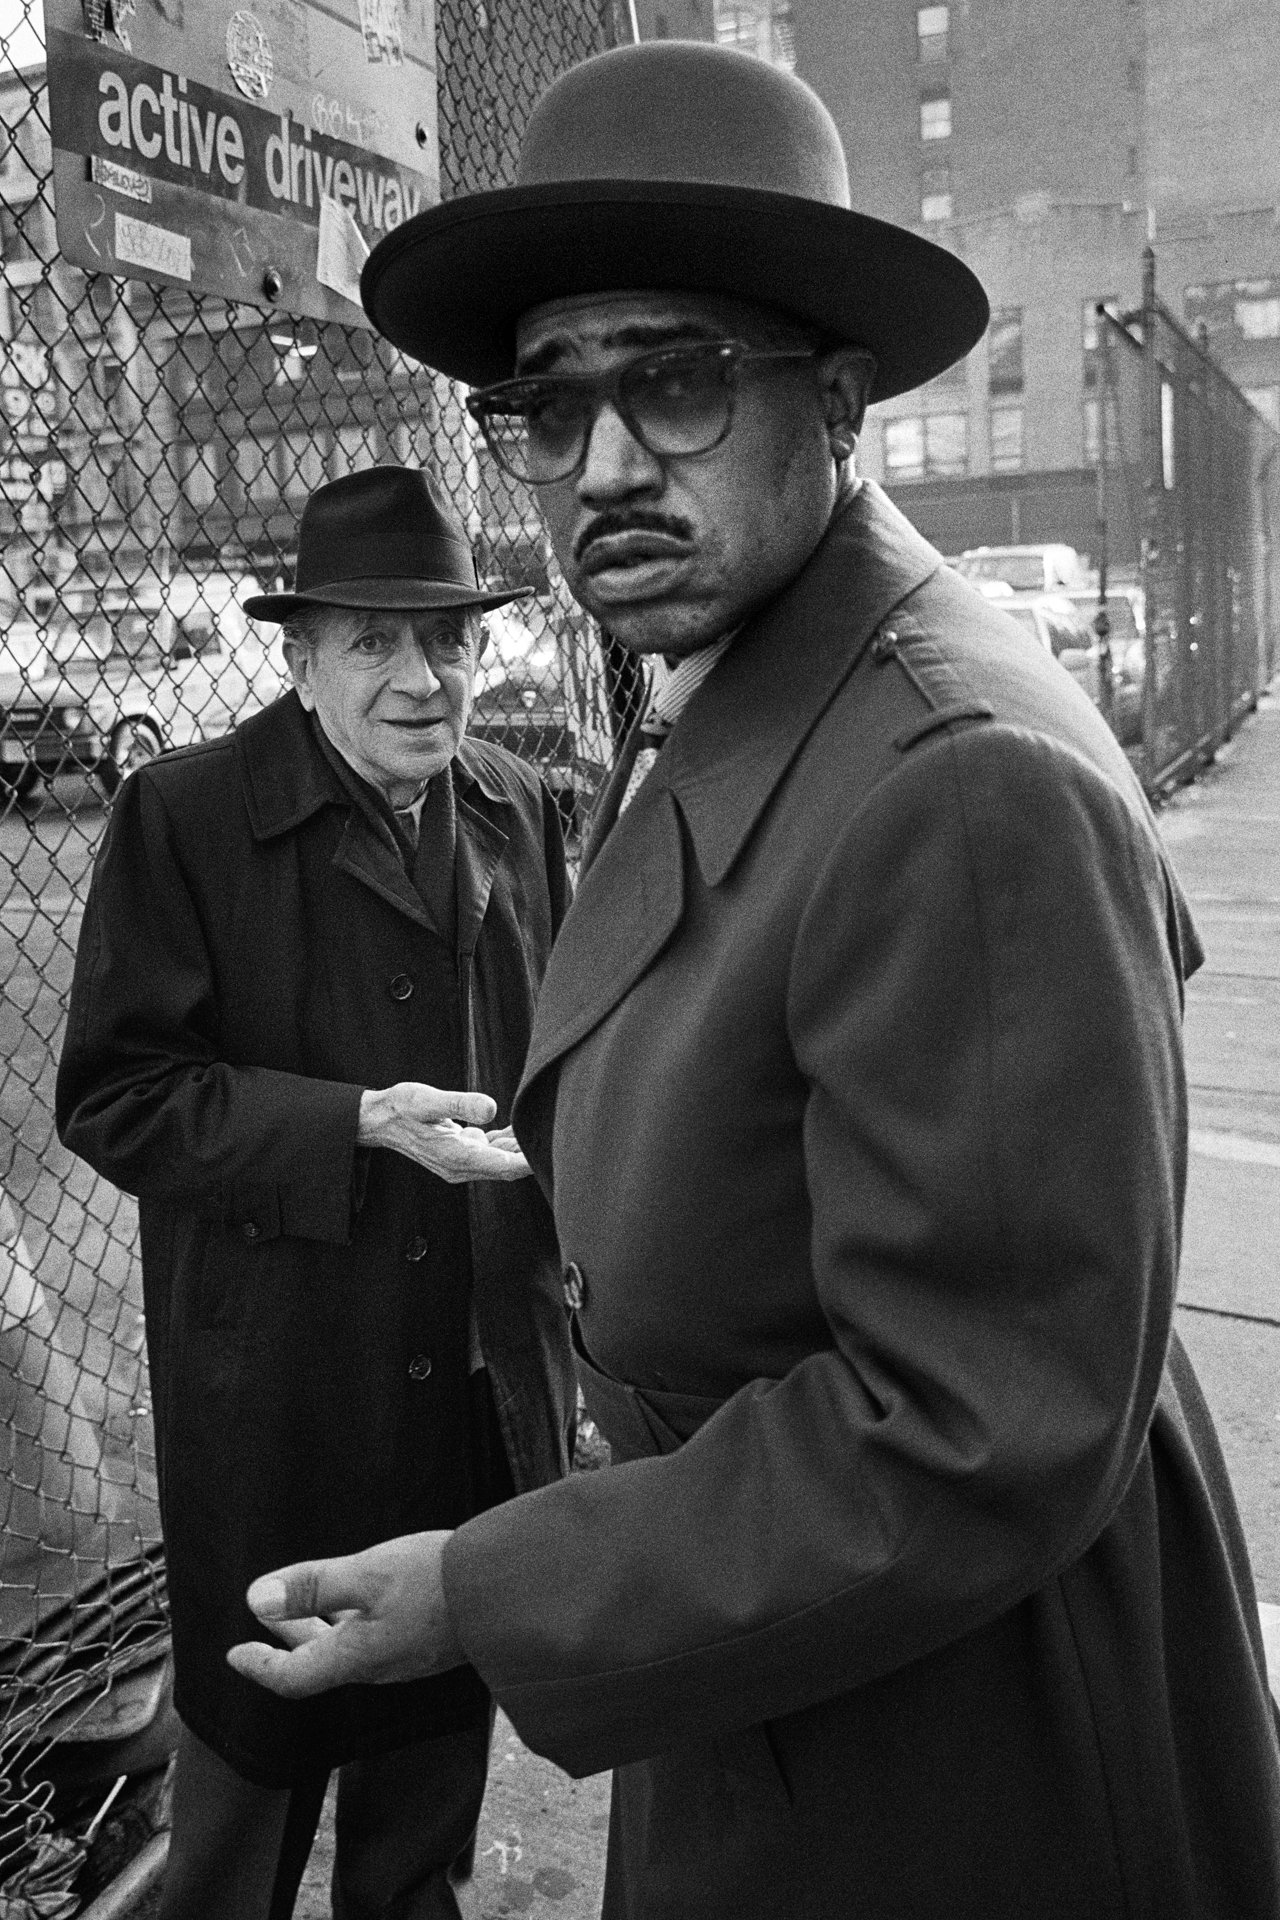 Two Dudes, 8th Ave., NYC, 1989